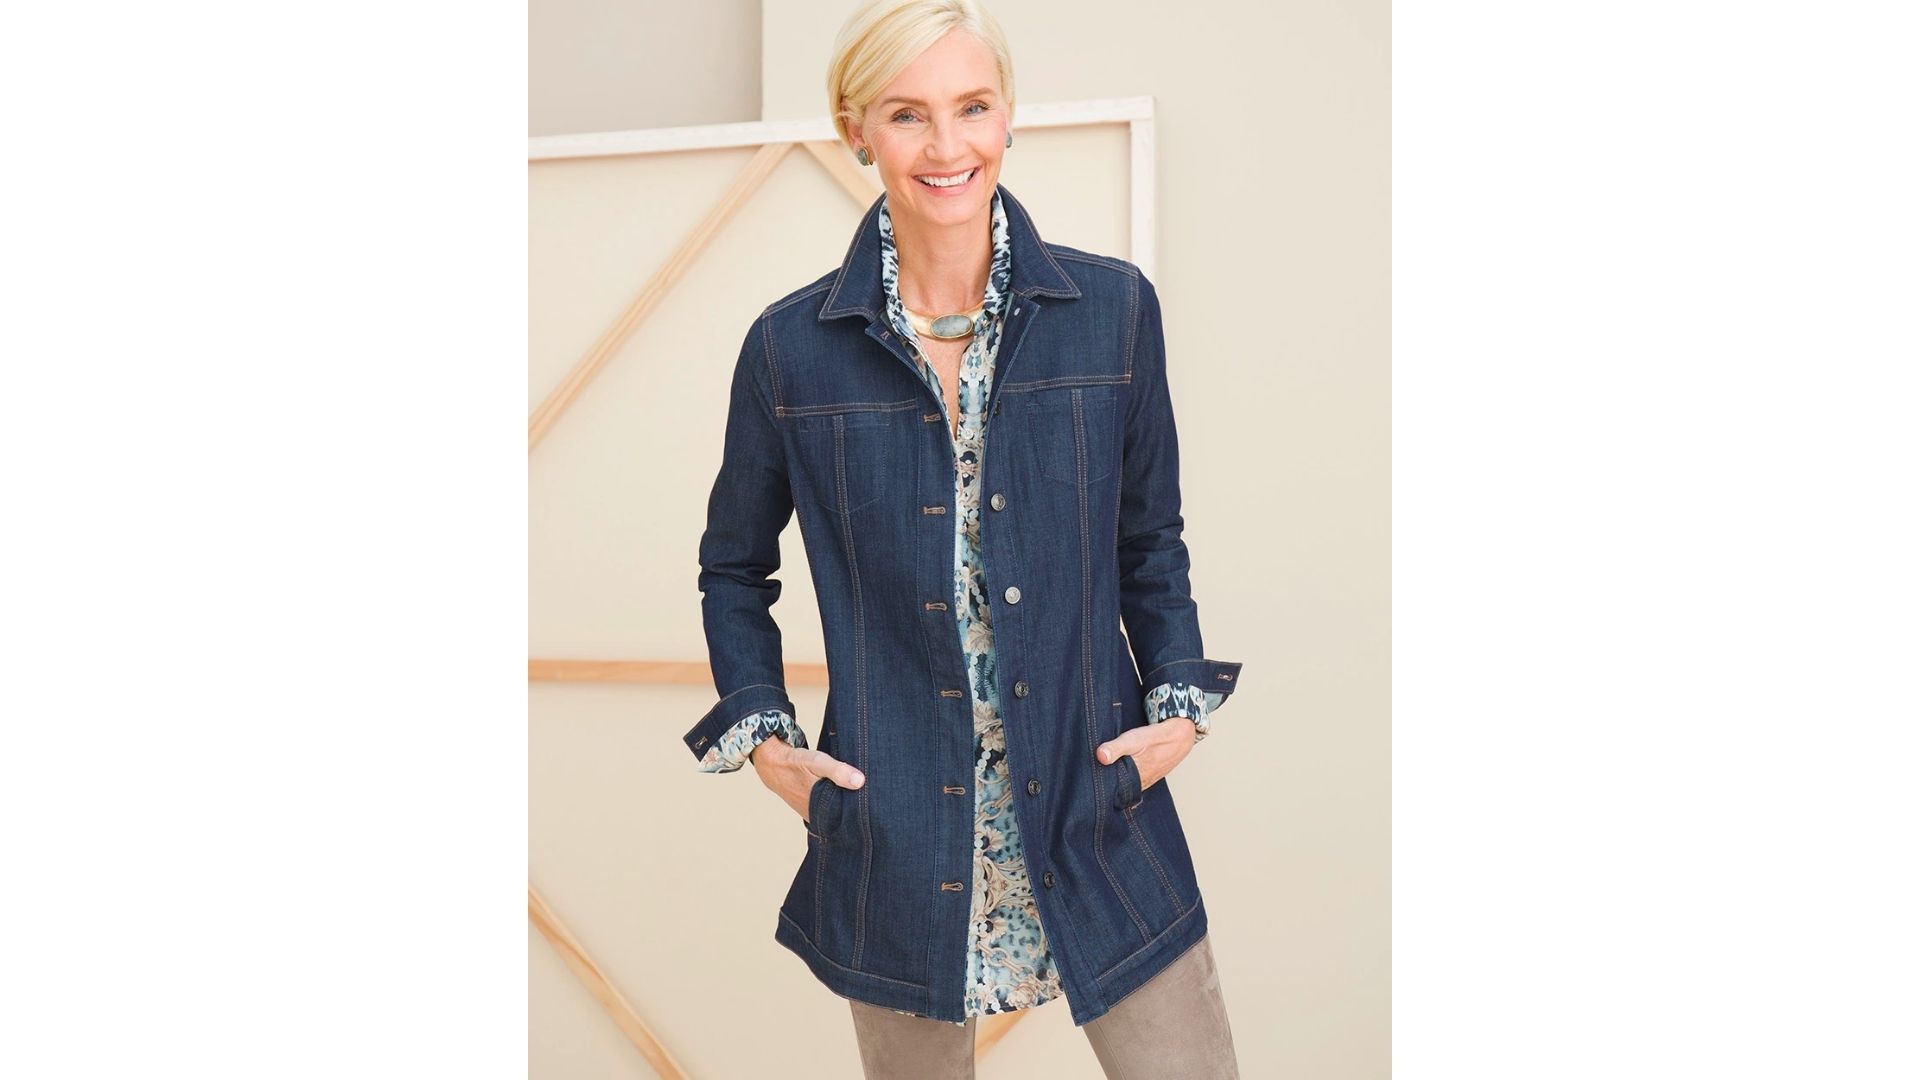 Best Clothing Stores for Women Over 50